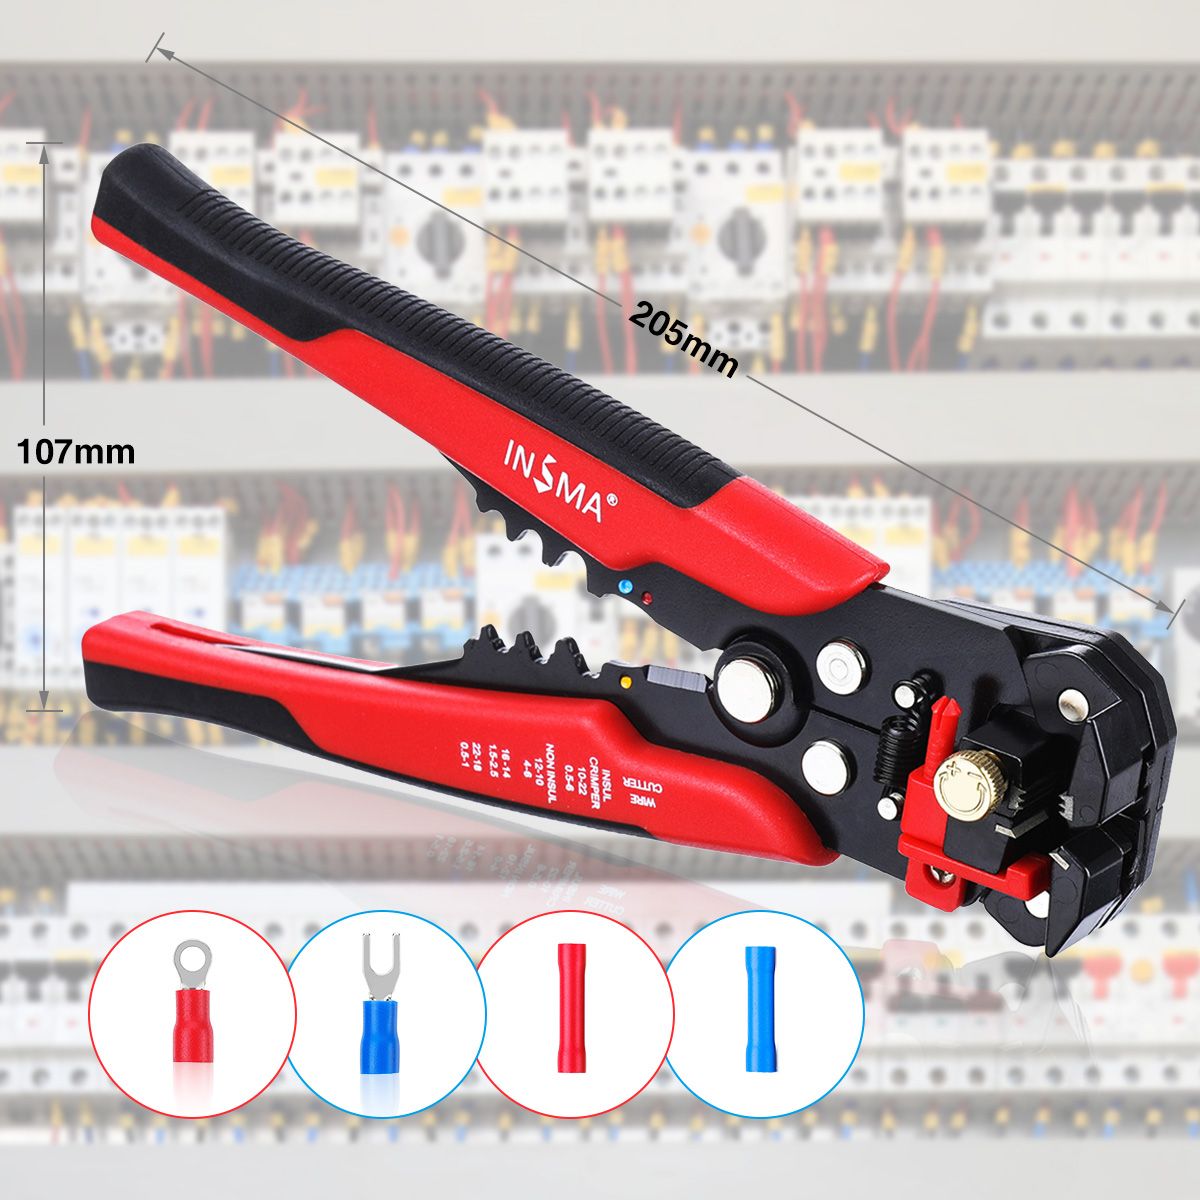 INSMA-Multifunctional-Automatic-Terminal-Crimper-Plier-Wire-and-Cable-Stripping-Pliers-Wire-Strippin-1543323